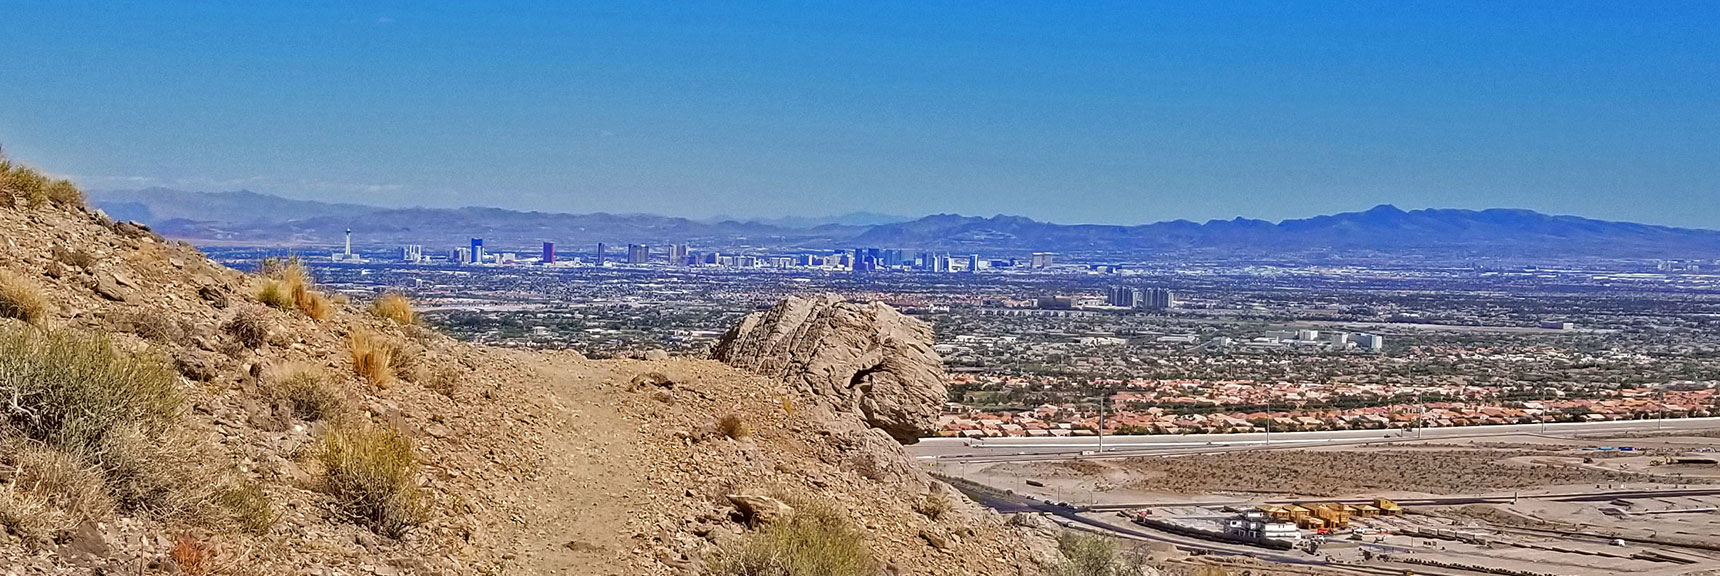 Las Vegas Strip Viewed from Hold Fast Trail. Windy, Clear Afternoon. | Little La Madre Mt, Little El Padre Mt, Little Burnt Peak | Near La Madre Mountains Wilderness, Nevada